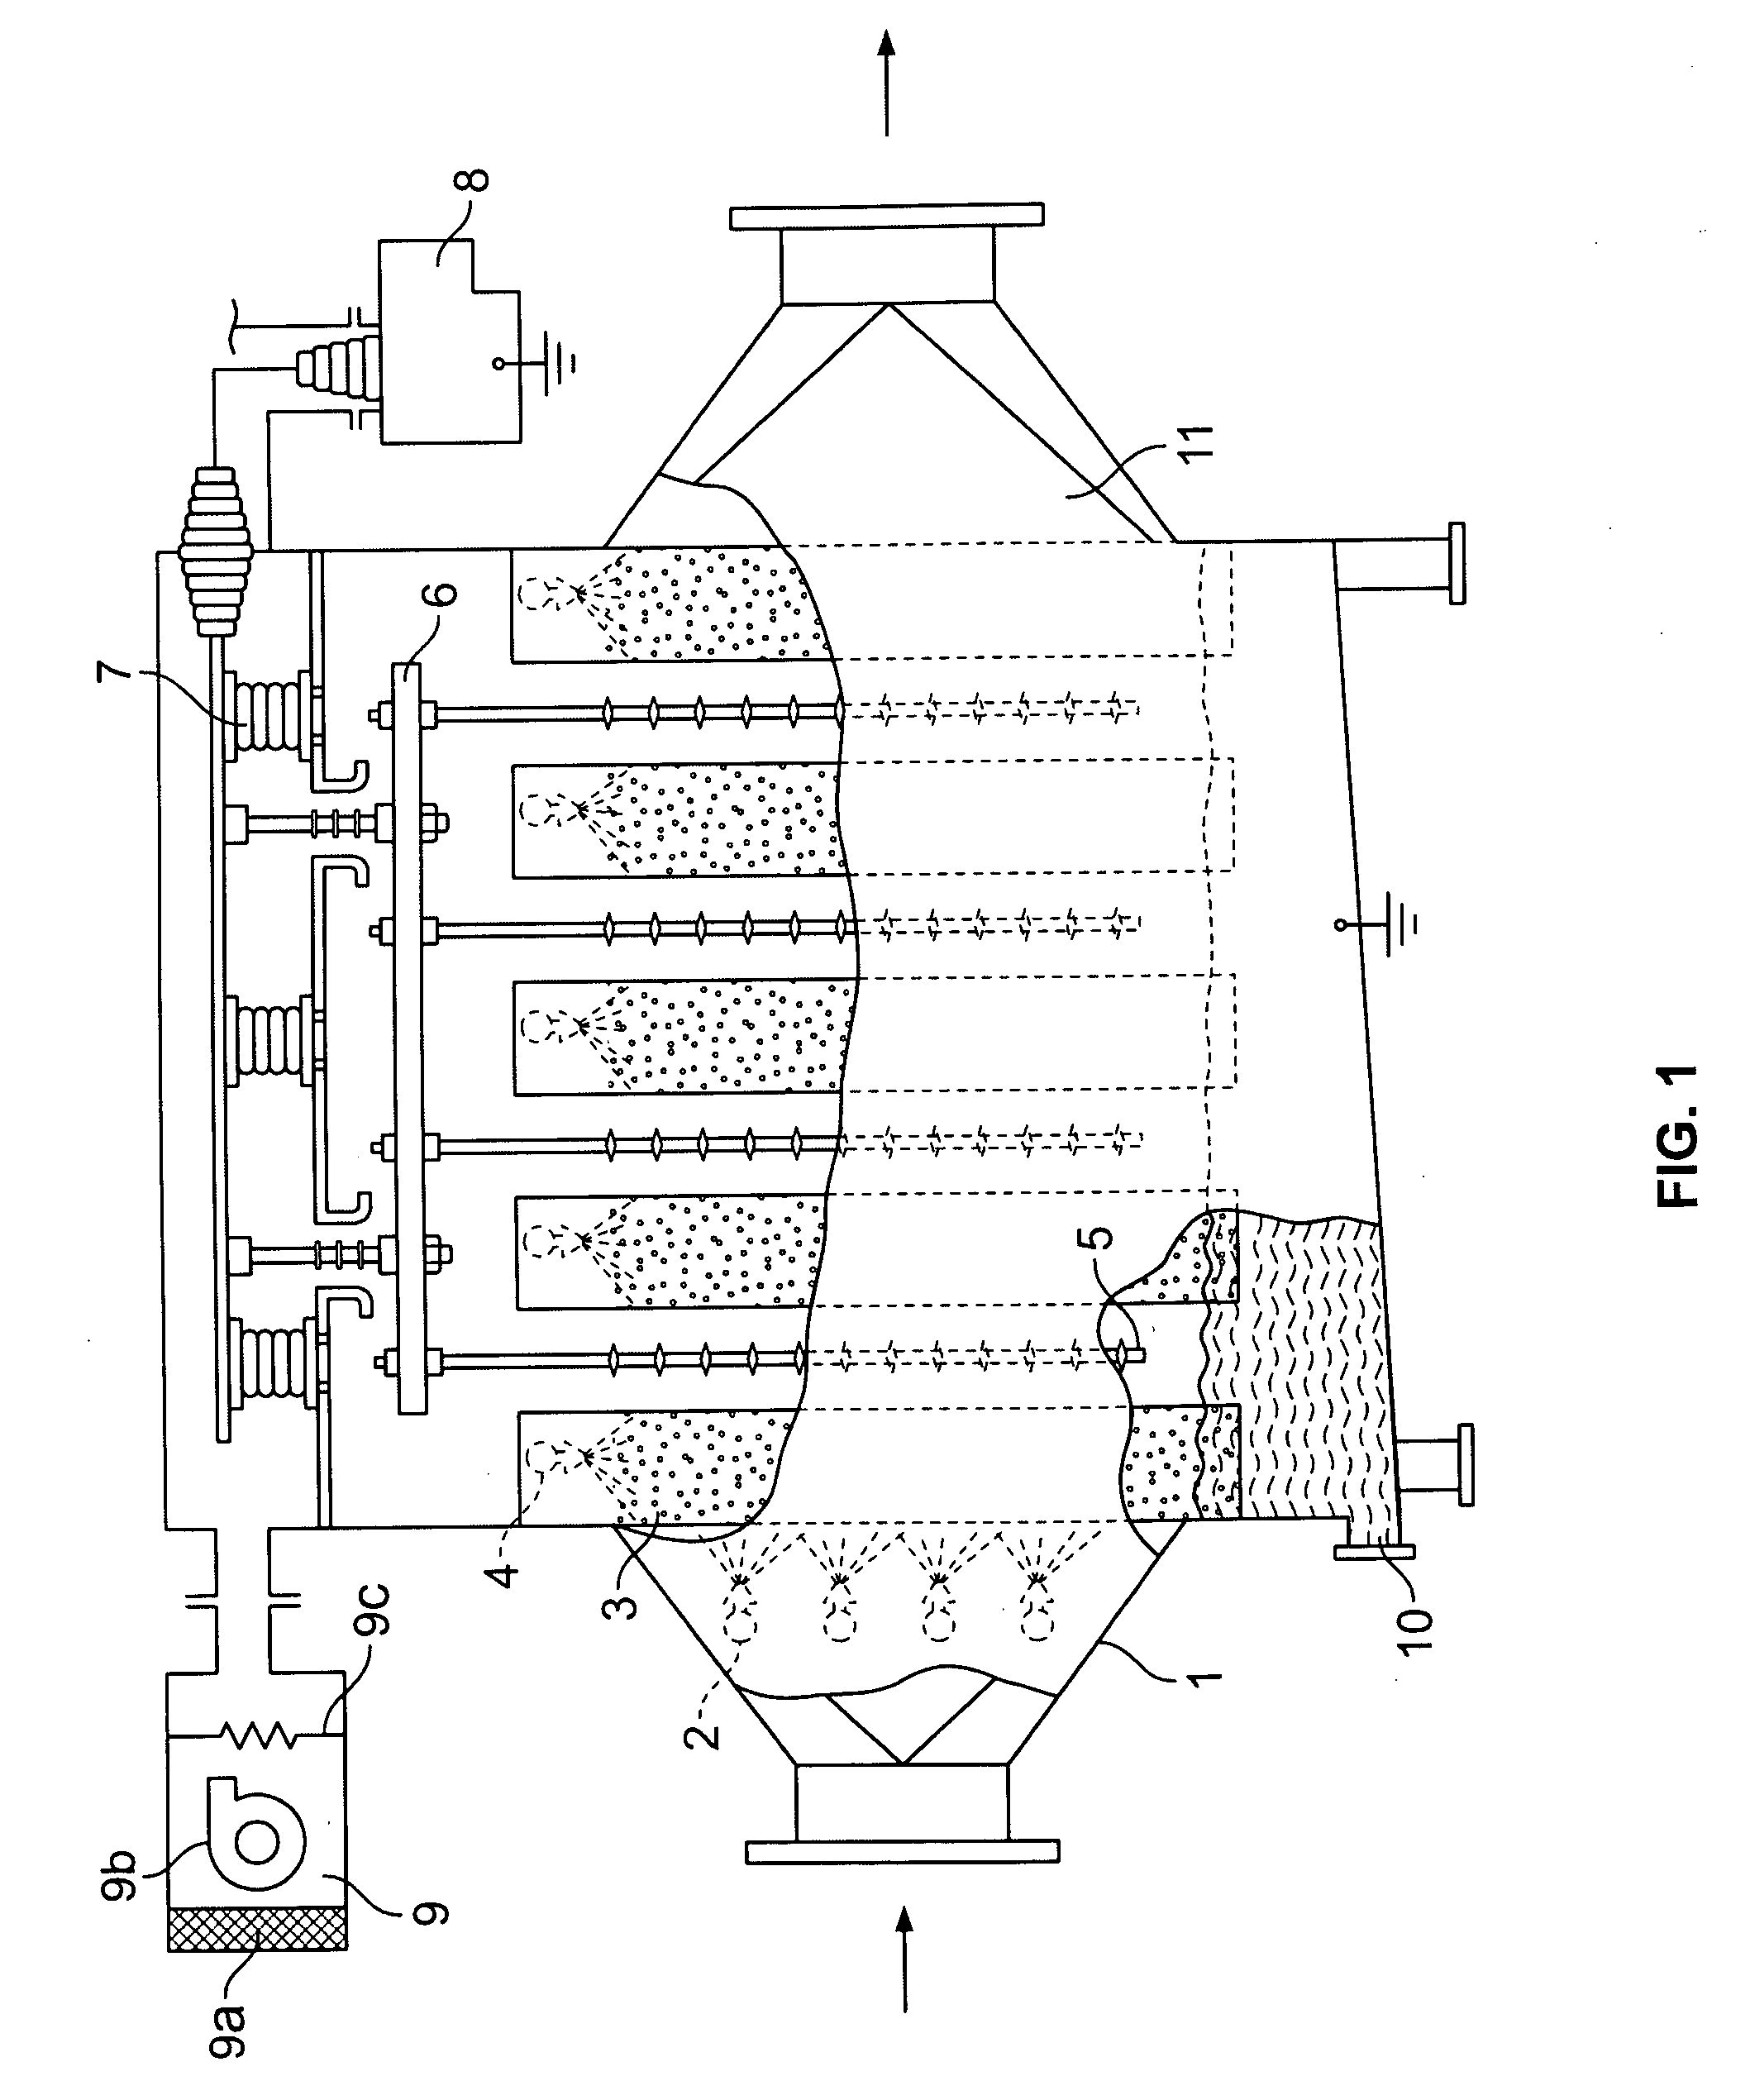 Method and apparatus for particulate removal and undesirable vapor scrubbing from a moving gas stream